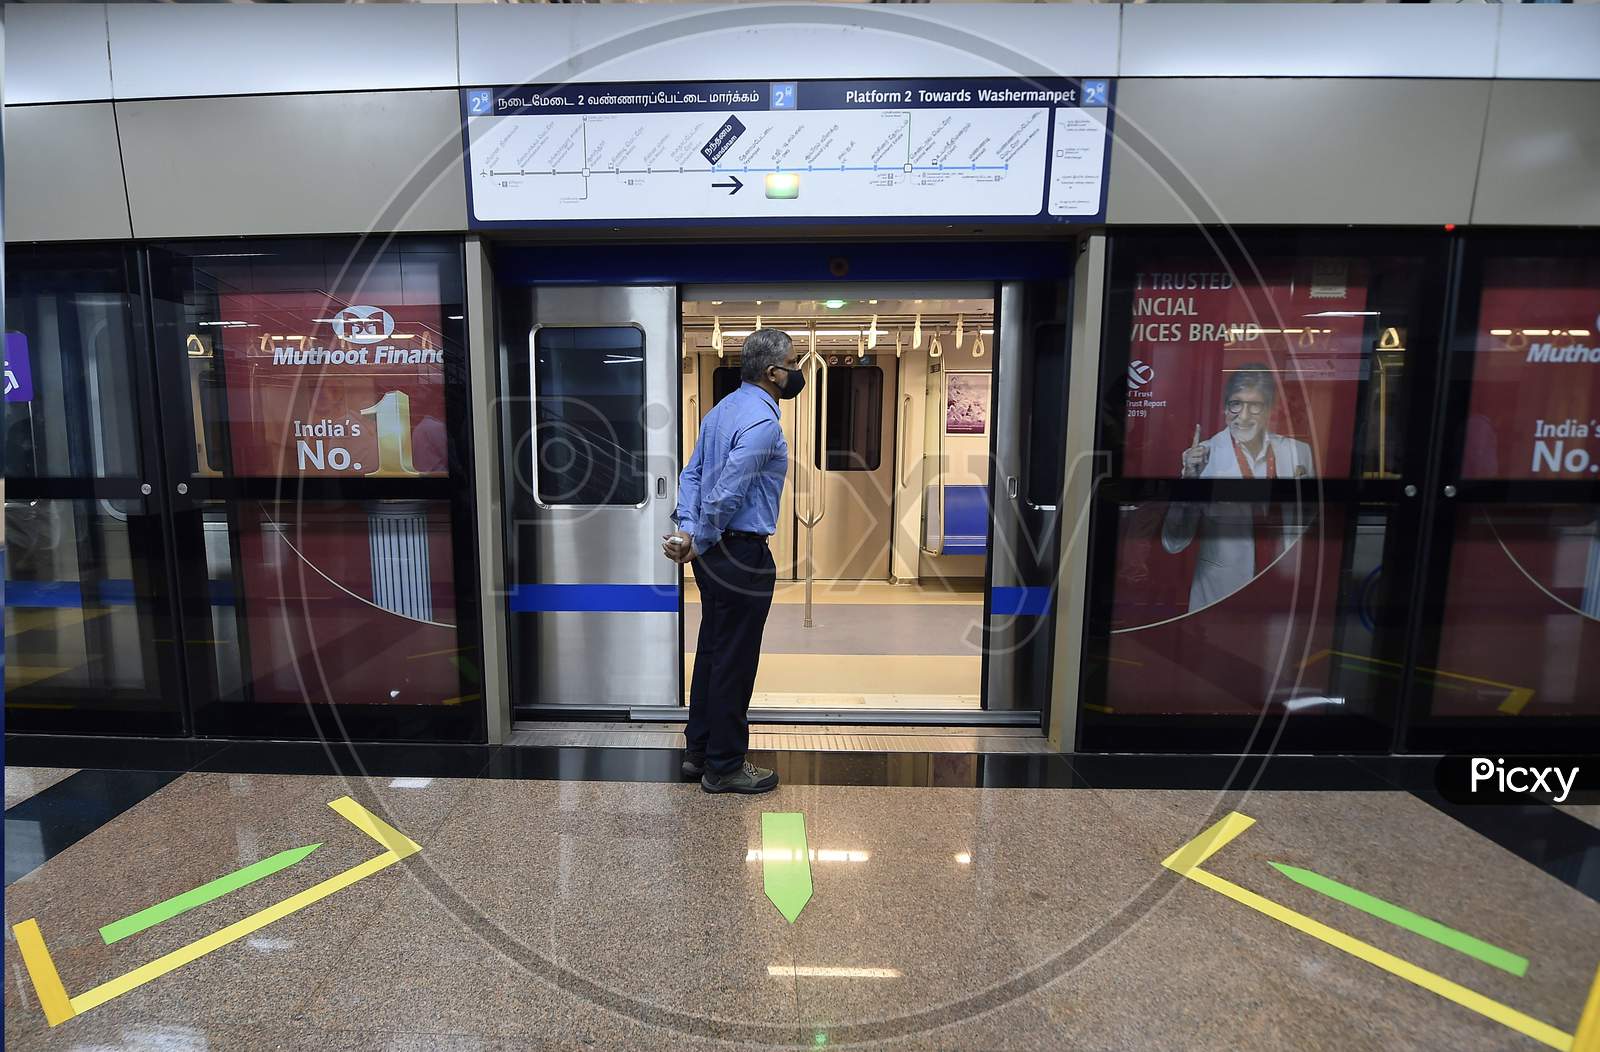 Commuters Travel In Metro Train Following Resumption Of Chennai Metro Services After Over Five Months Suspension Due To Covid-19 Outbreak, In Chennai, Tuesday, Sep.8, 2020.